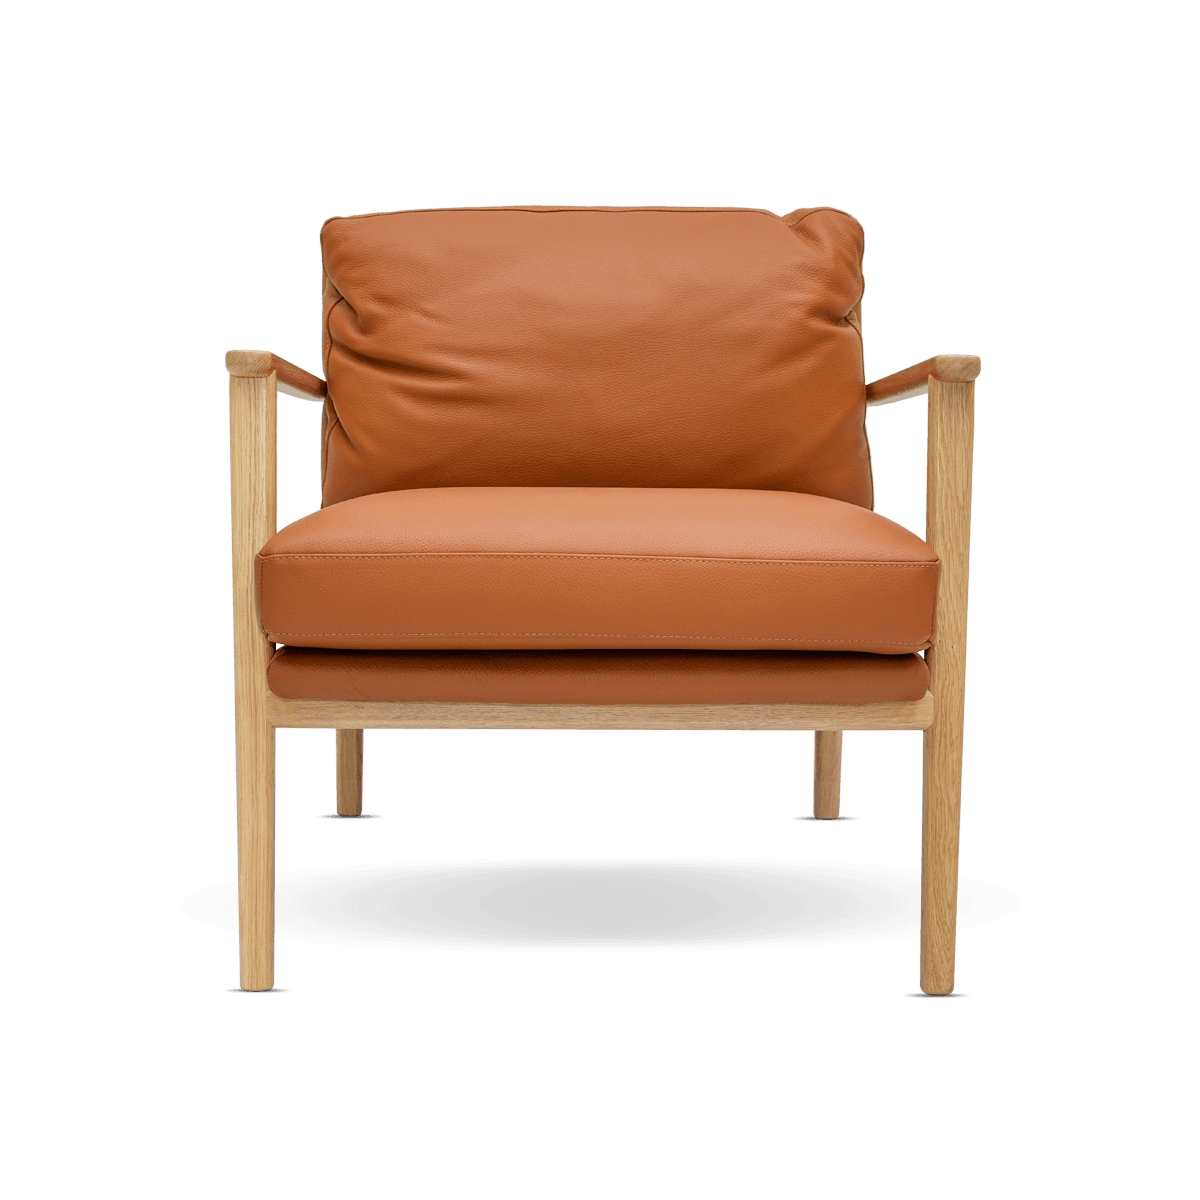 Grey Arm Chair Terracotta,Roma Leather